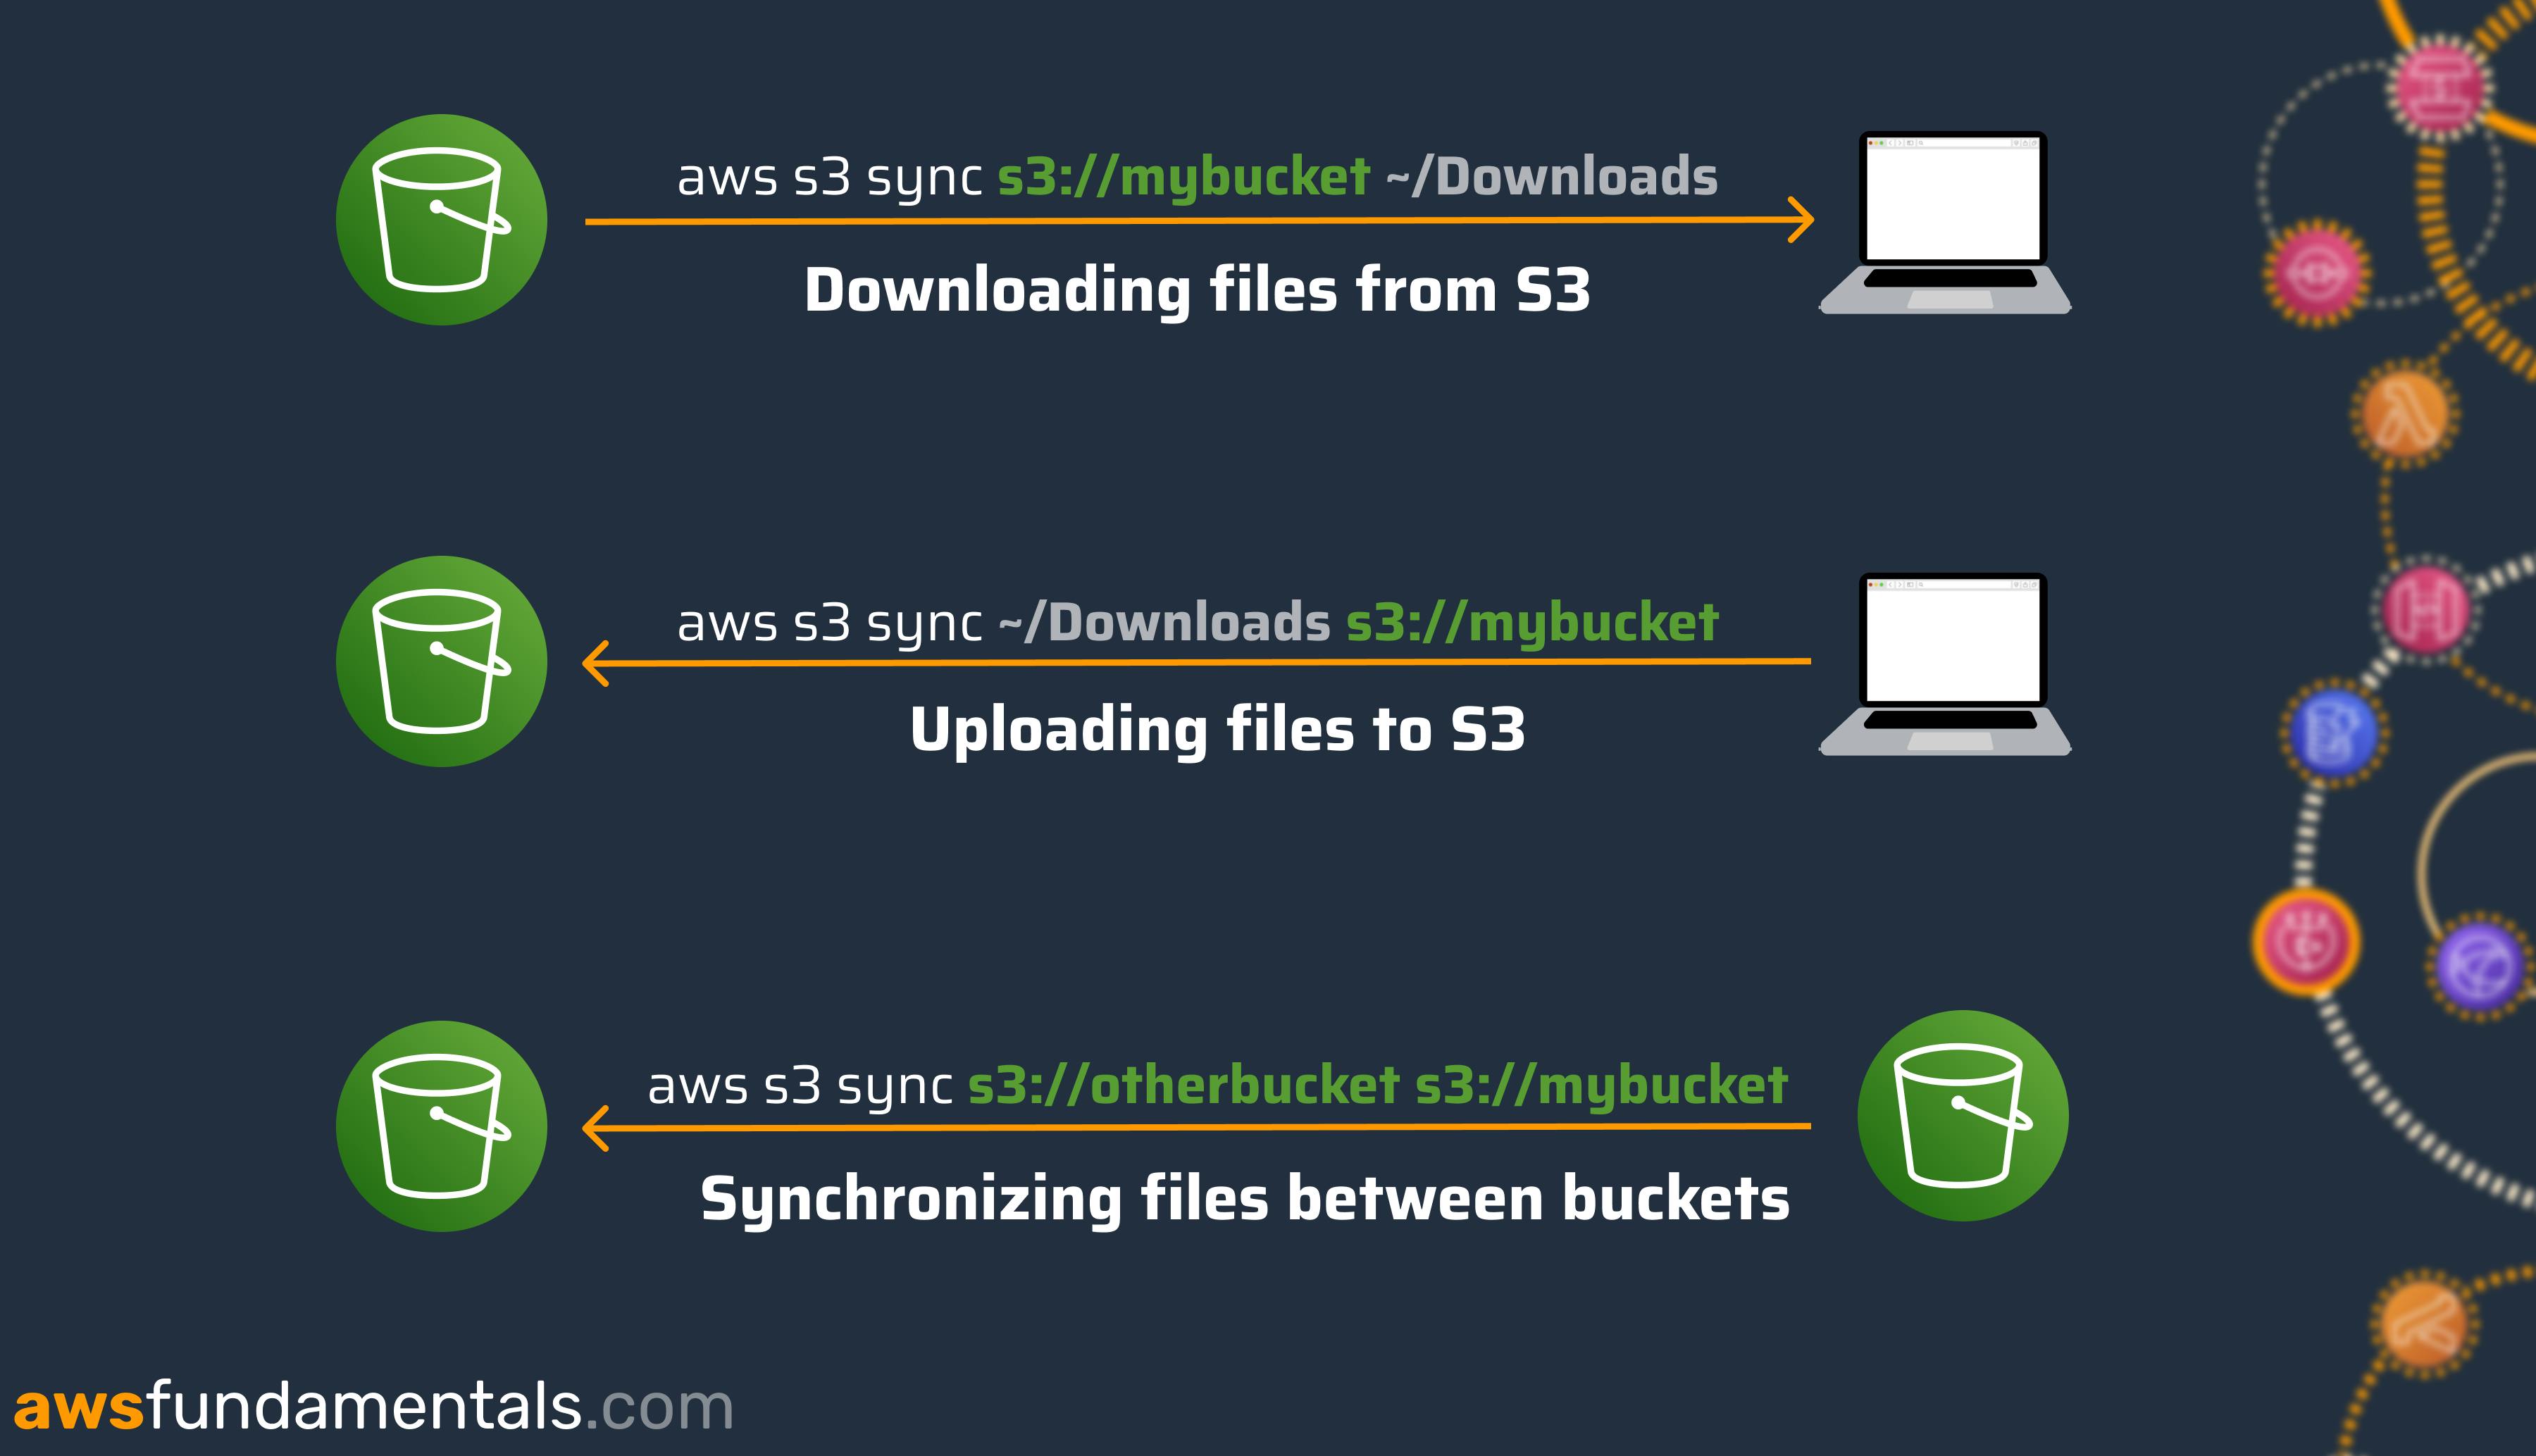 Using the AWS S3 sync command to upload, download, and sync between two buckets